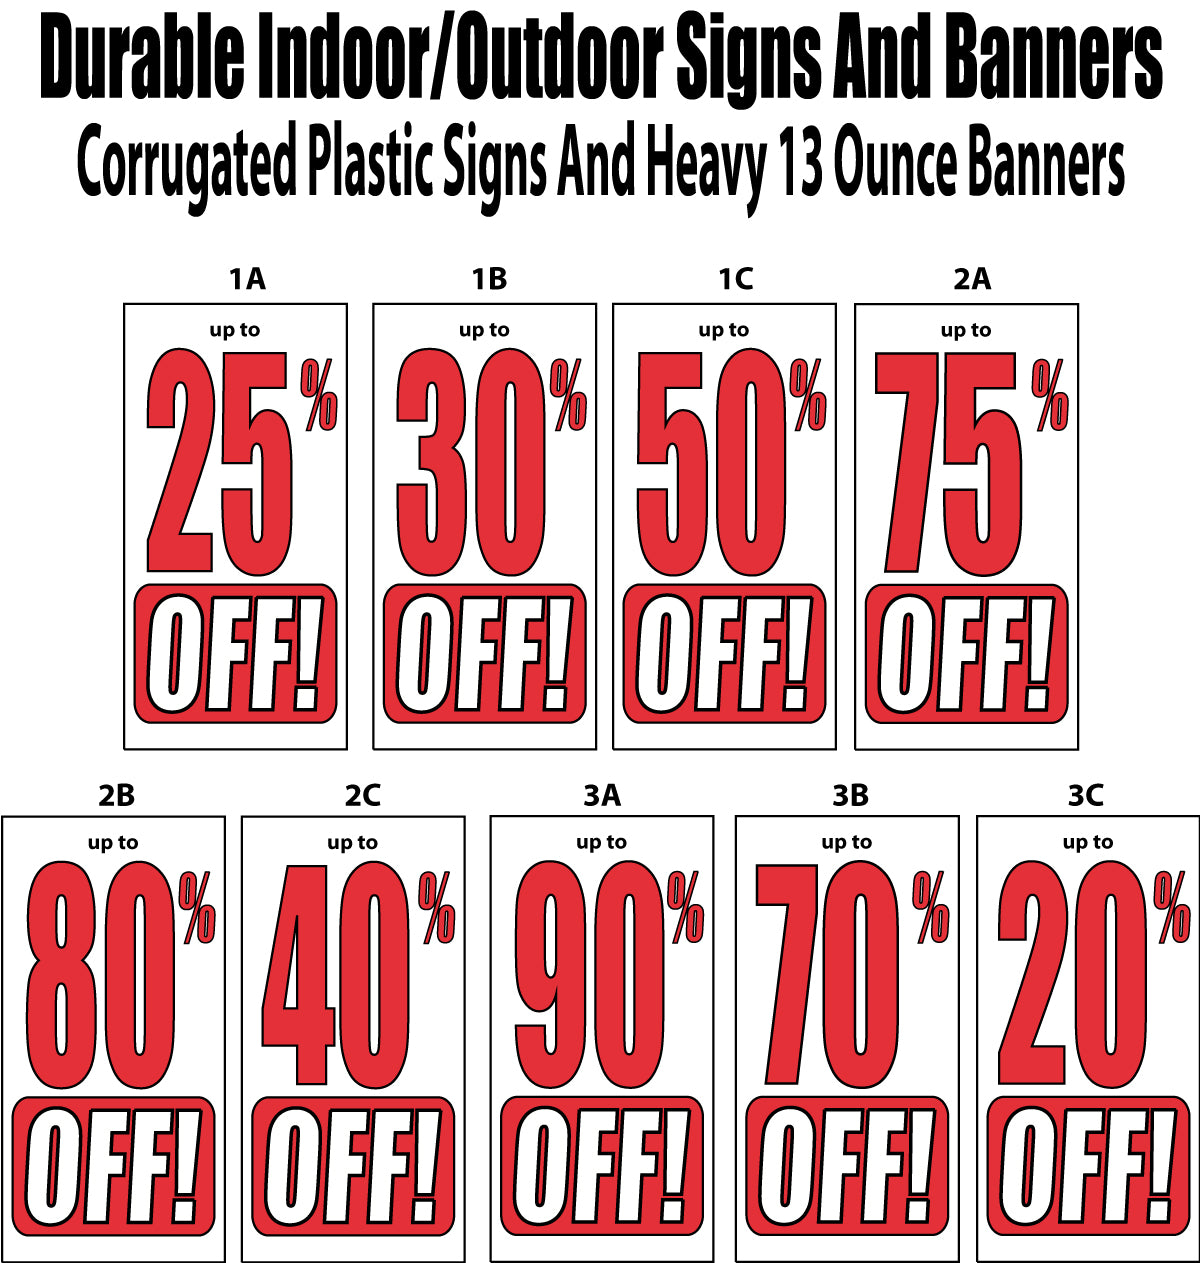 Percent Off Sign Packages and Banners